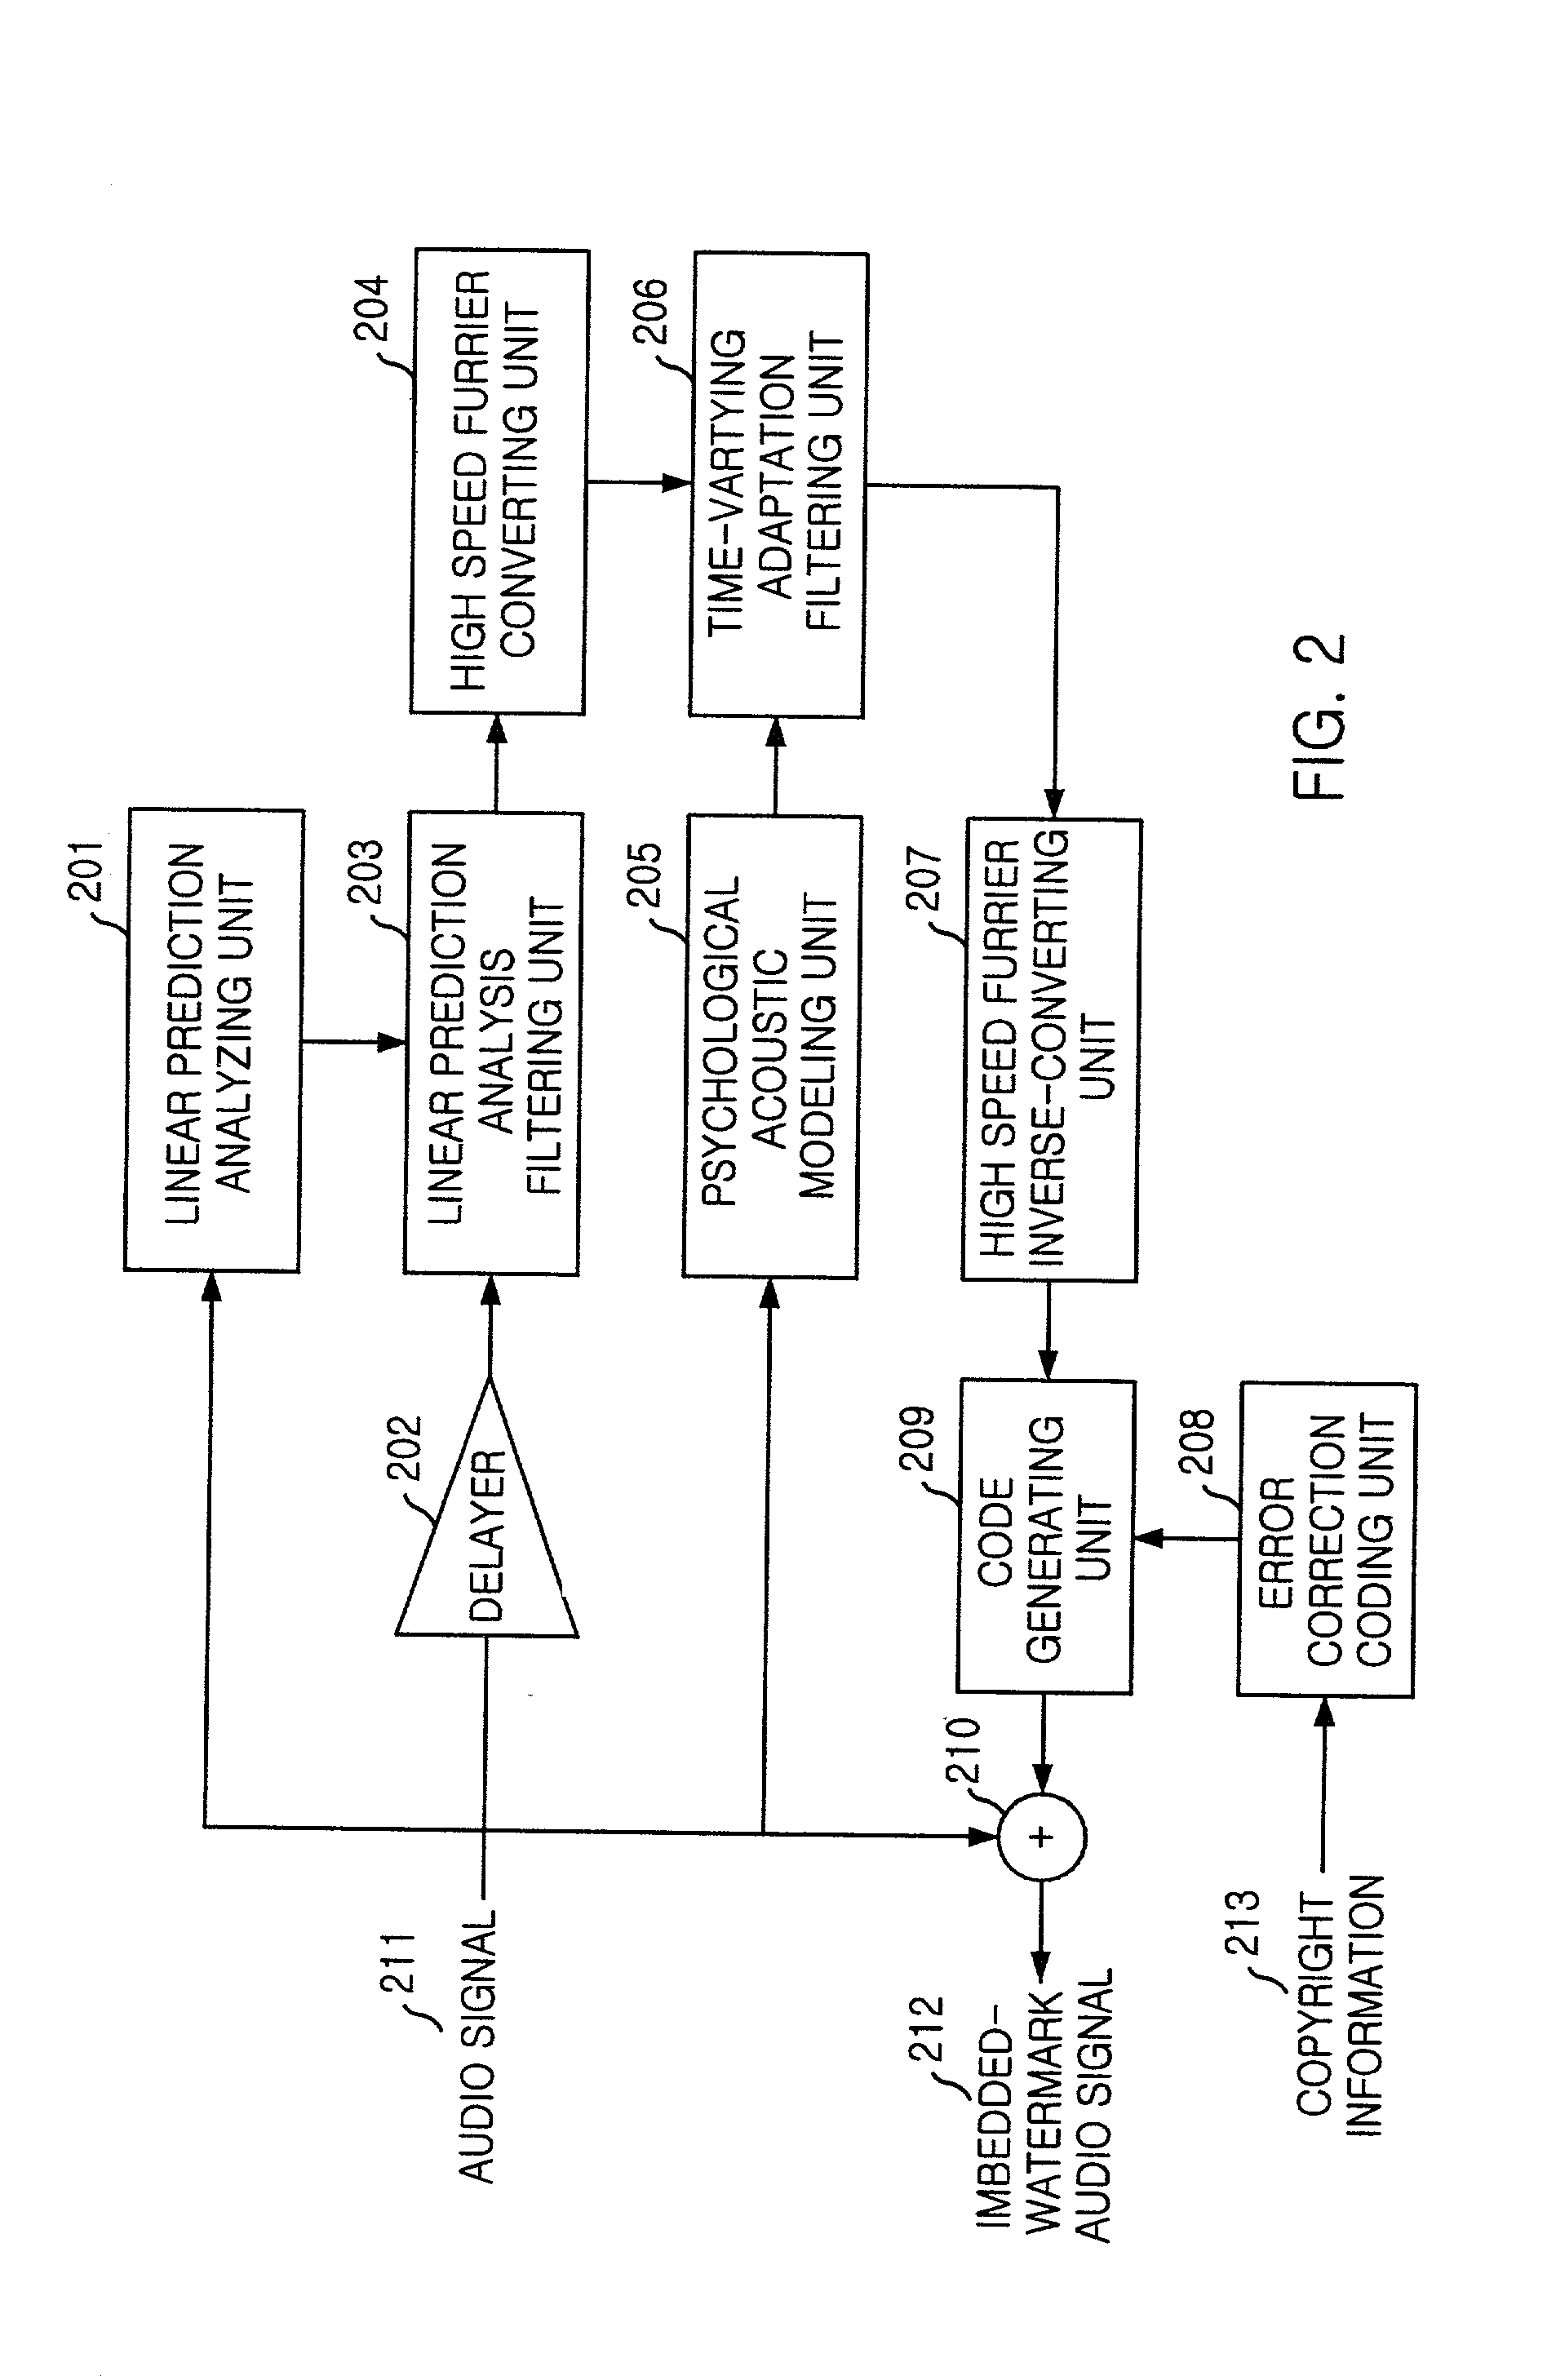 Apparatus and method for watermark embedding and detection using linear prediction analysis